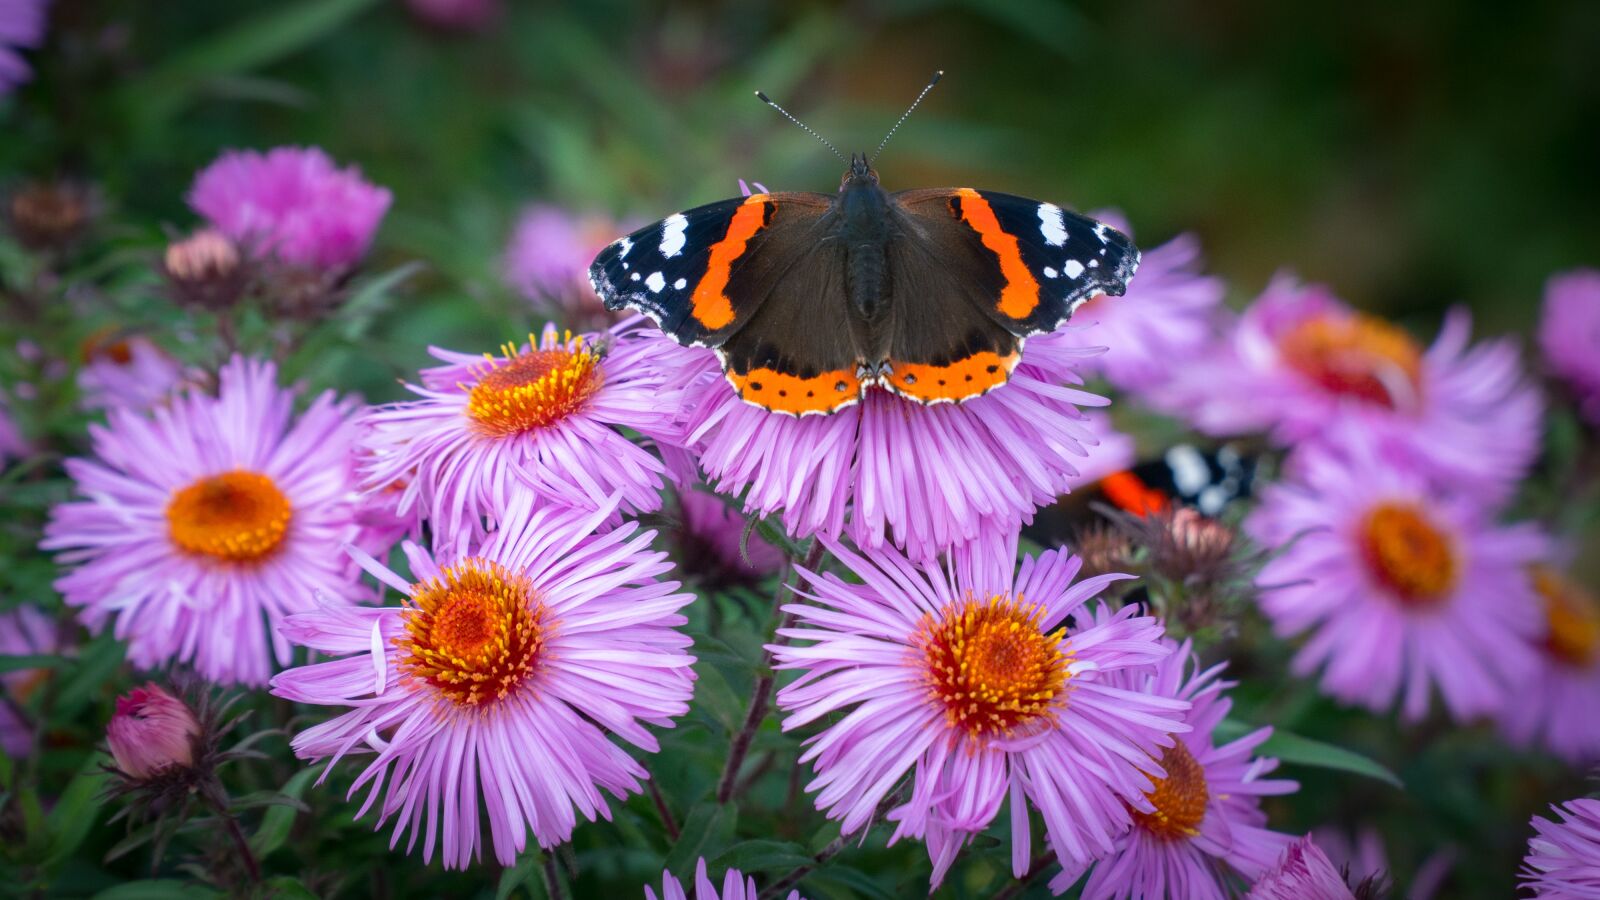 Sony a6300 sample photo. Red admiral, butterfly, nature photography